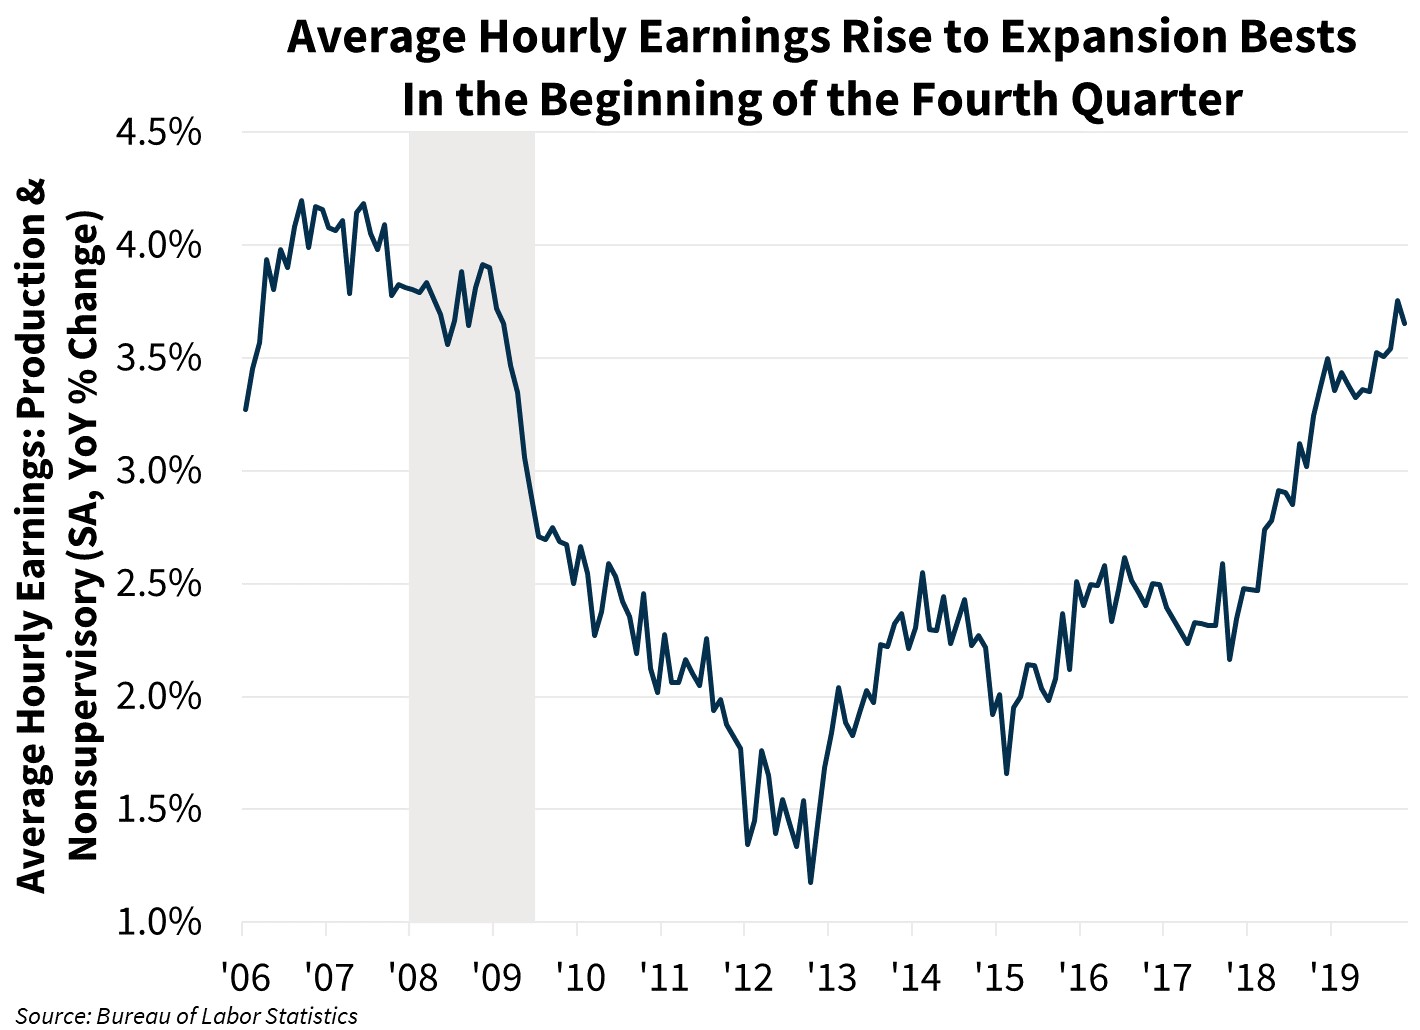 Average Hourly Earnings Rise to Expansion Bests in the Beginning of the Fourth Quarter